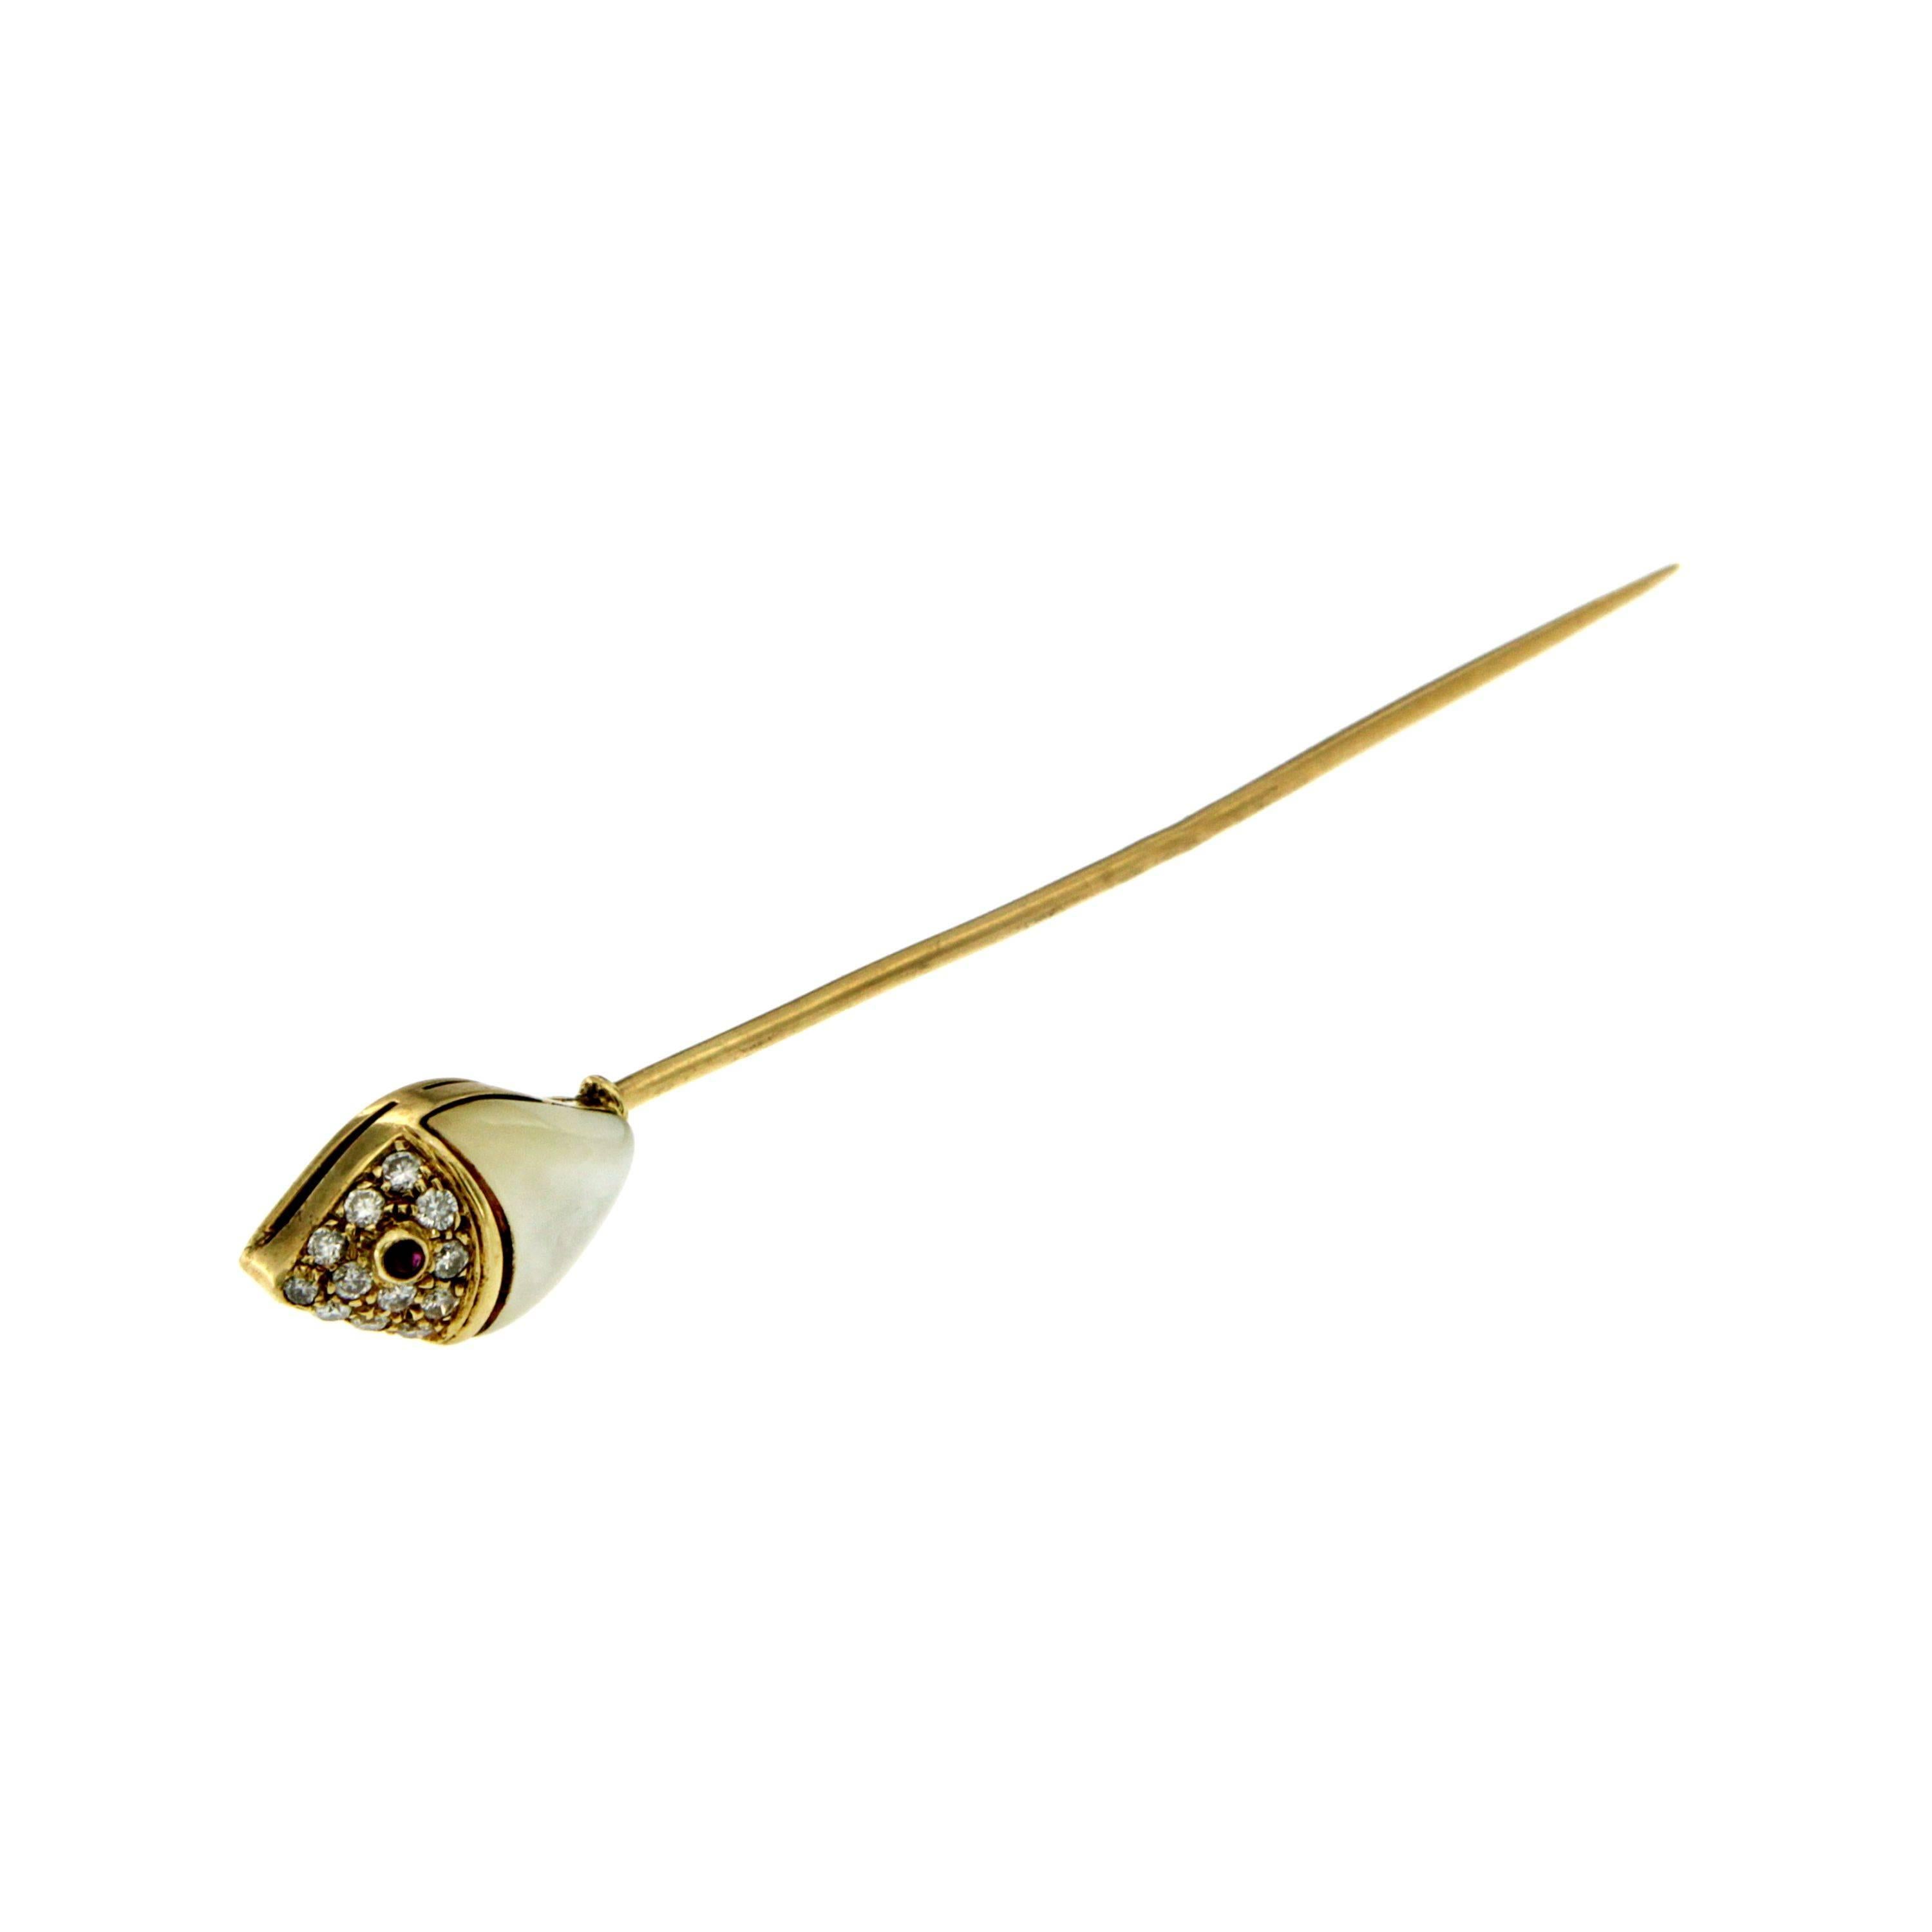 A Bulgari stickpin in 18k Yellow Gold consisting of mother-of-pearl, 0.30 cts of round brilliant cut diamonds and a red ruby for an eye forming the body of a small fish, this fantastic piece is part of Bulgari's Naturalia Fish Collection.
A truly